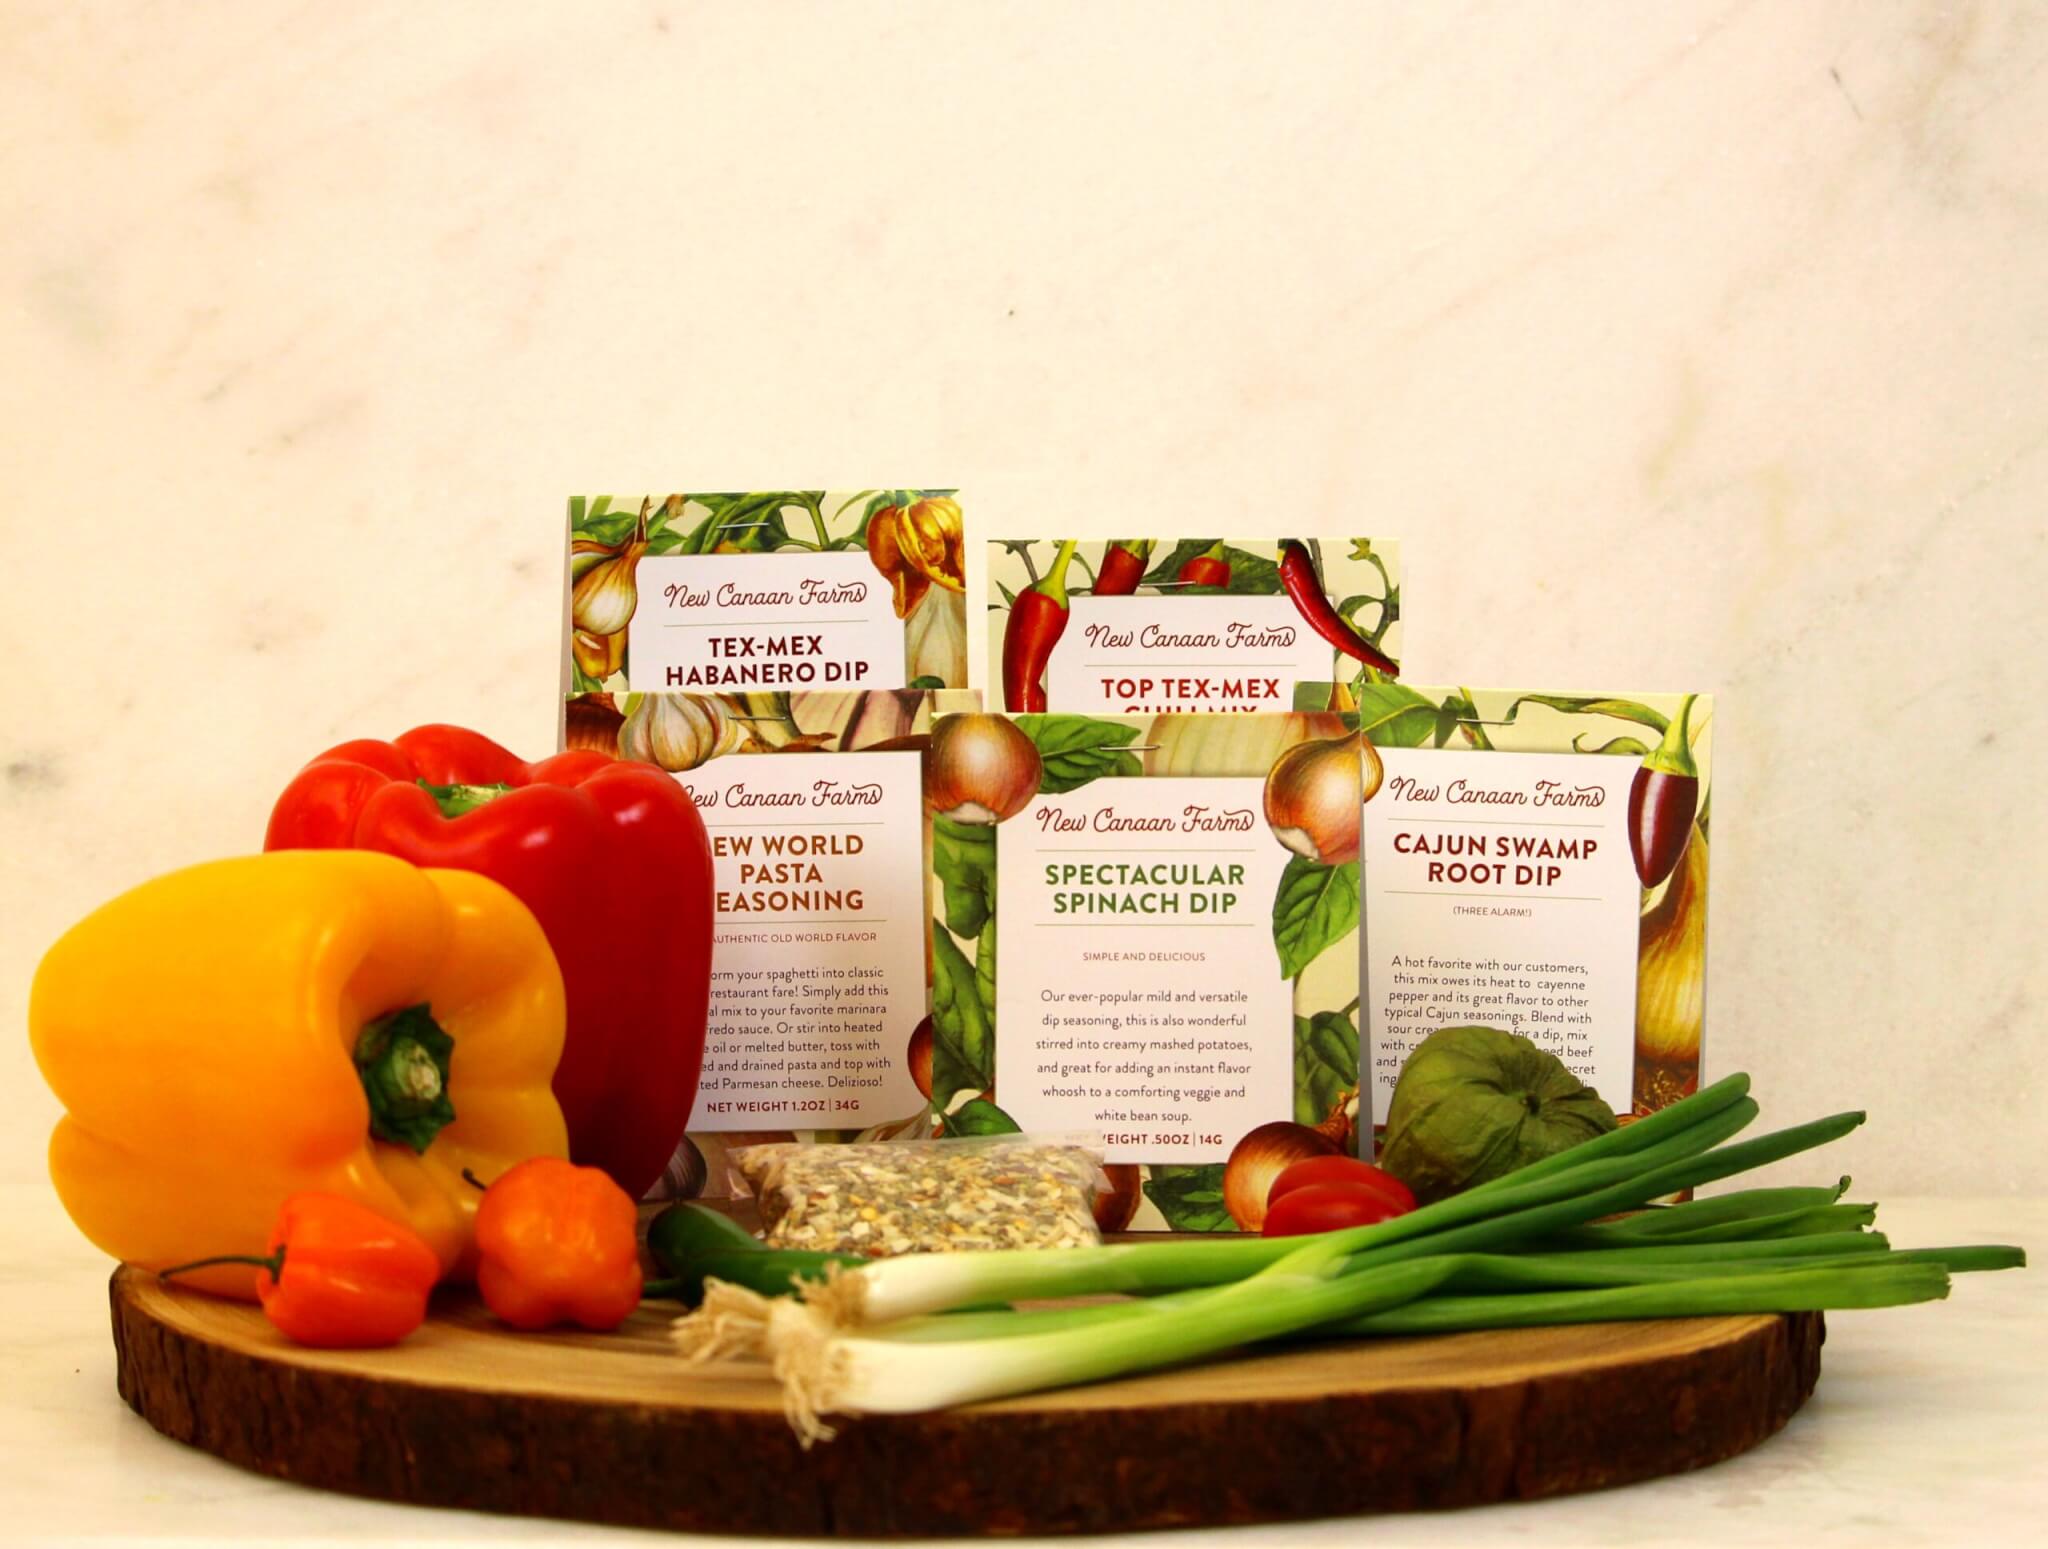 Five New Canaan Farms dip mixes, with newly designed product labels